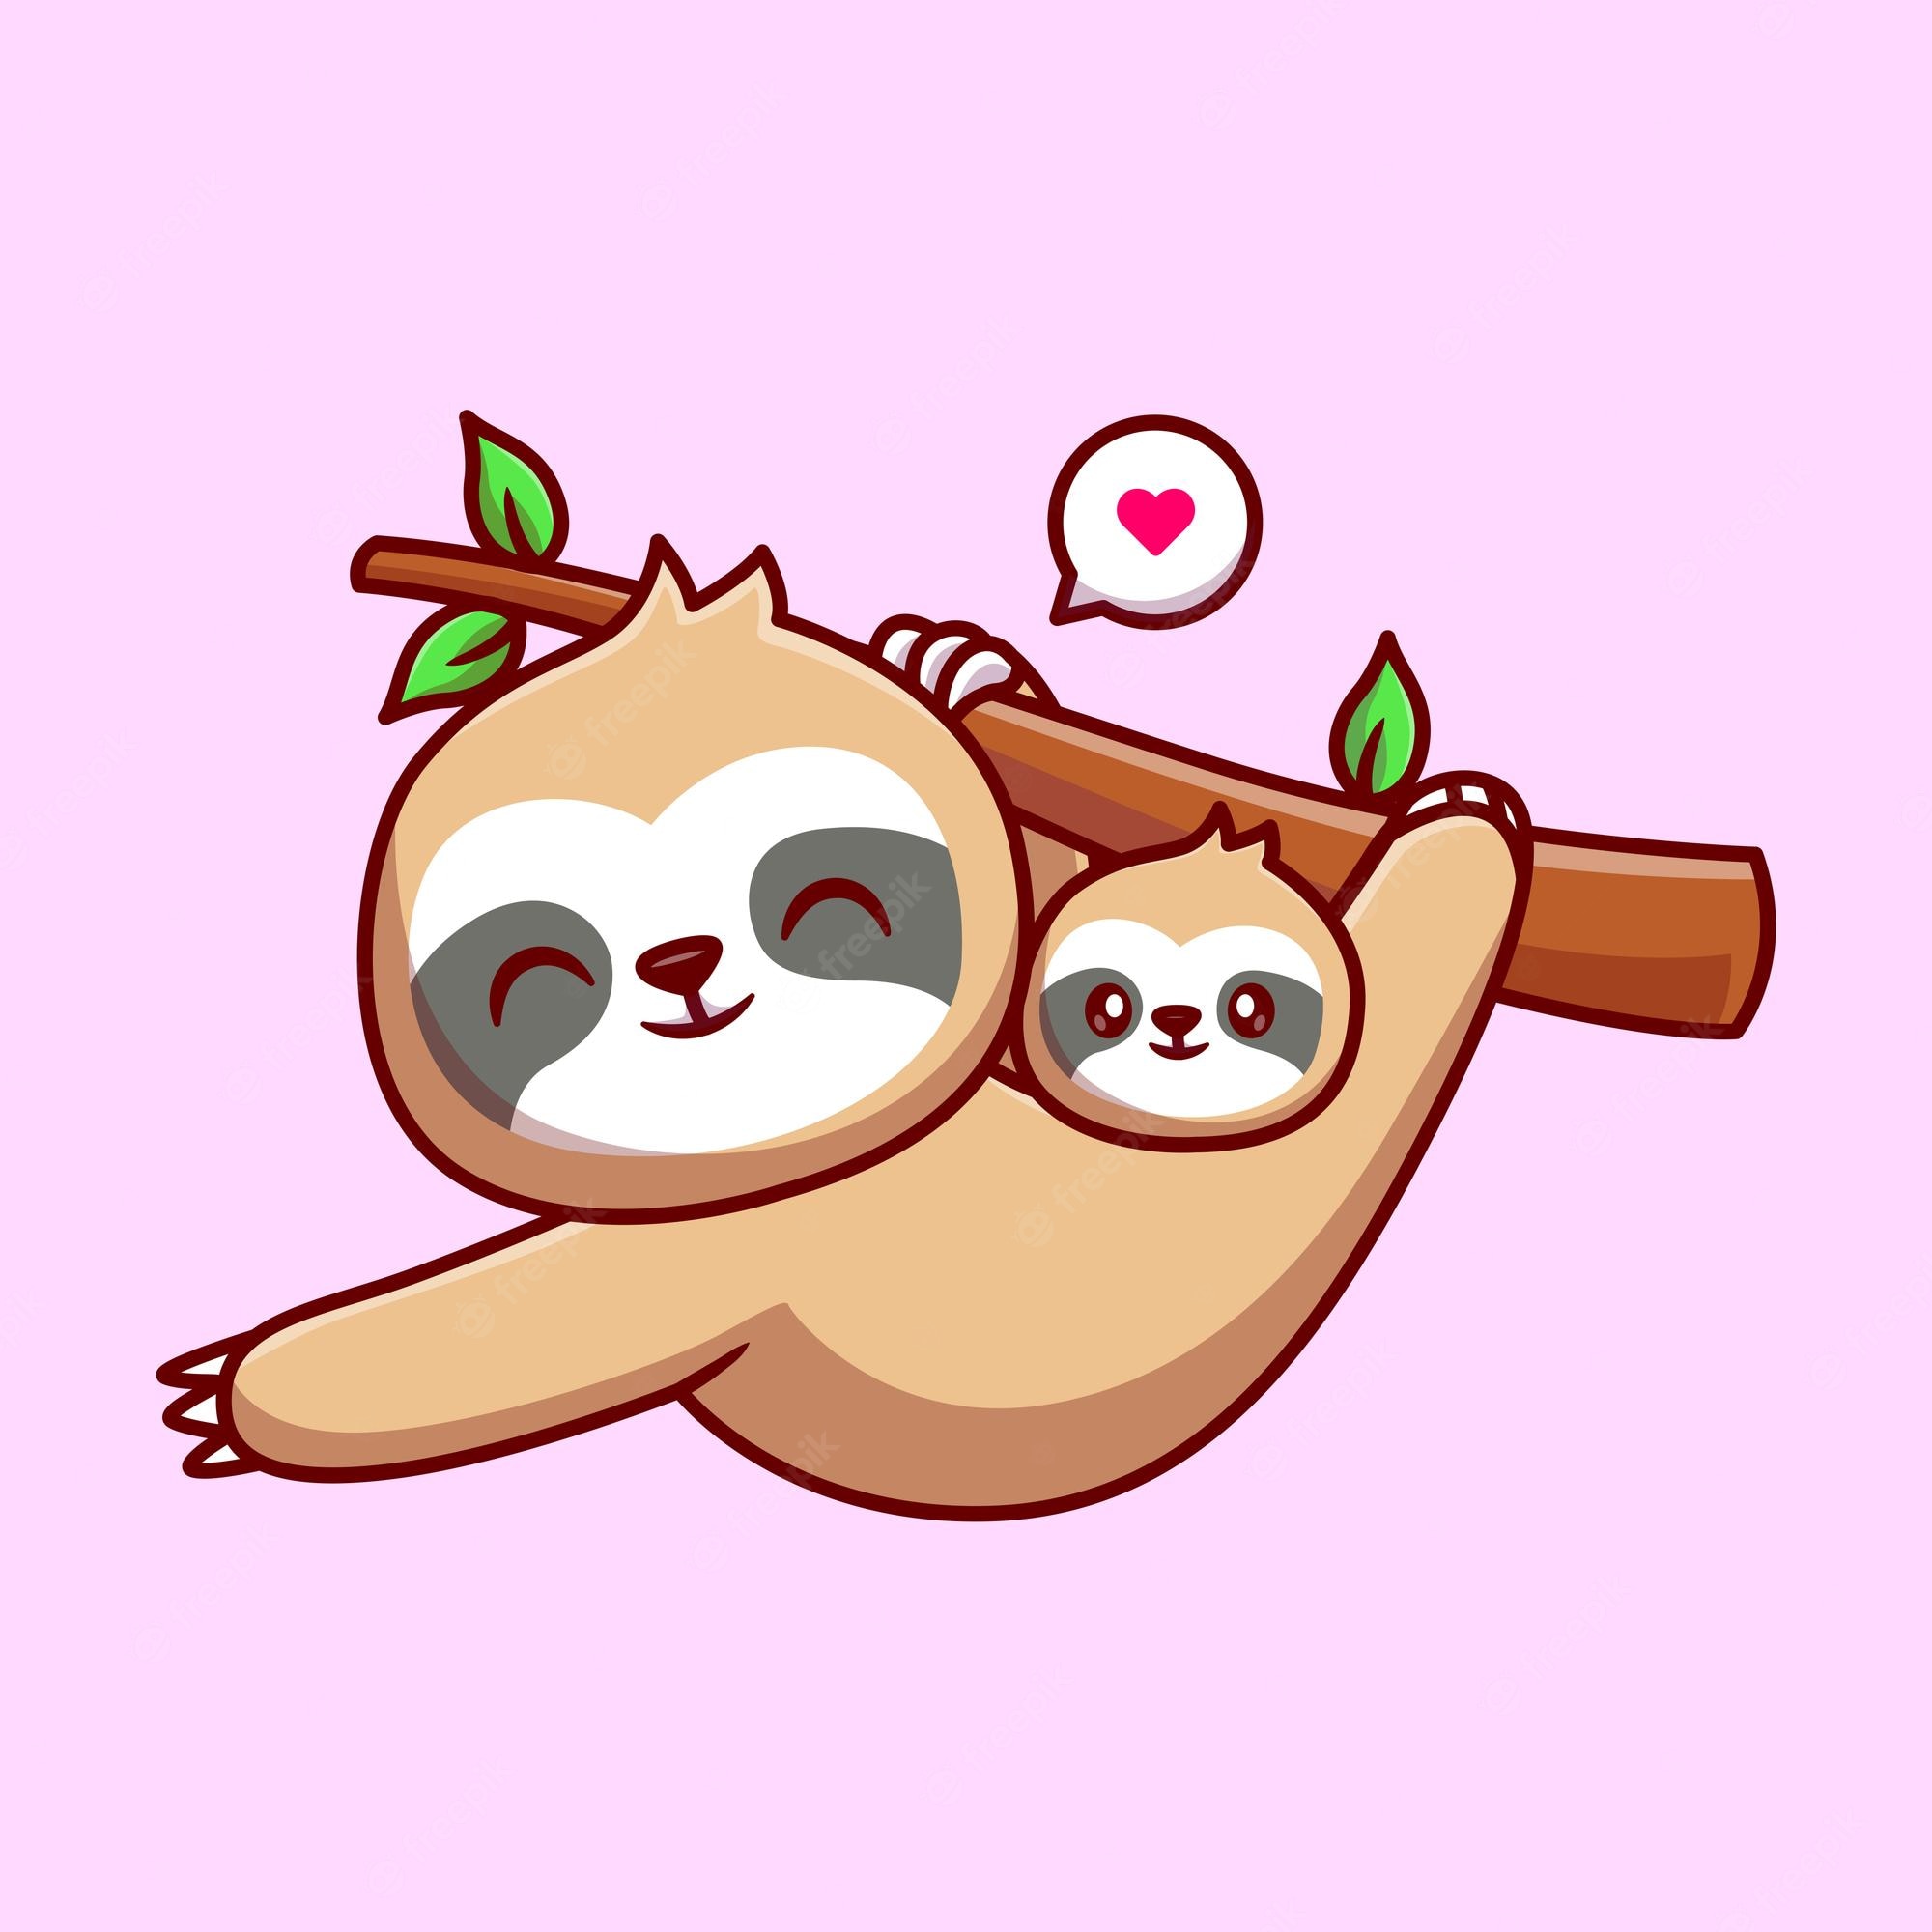 A cute sloth is hanging from the branch - Sloth